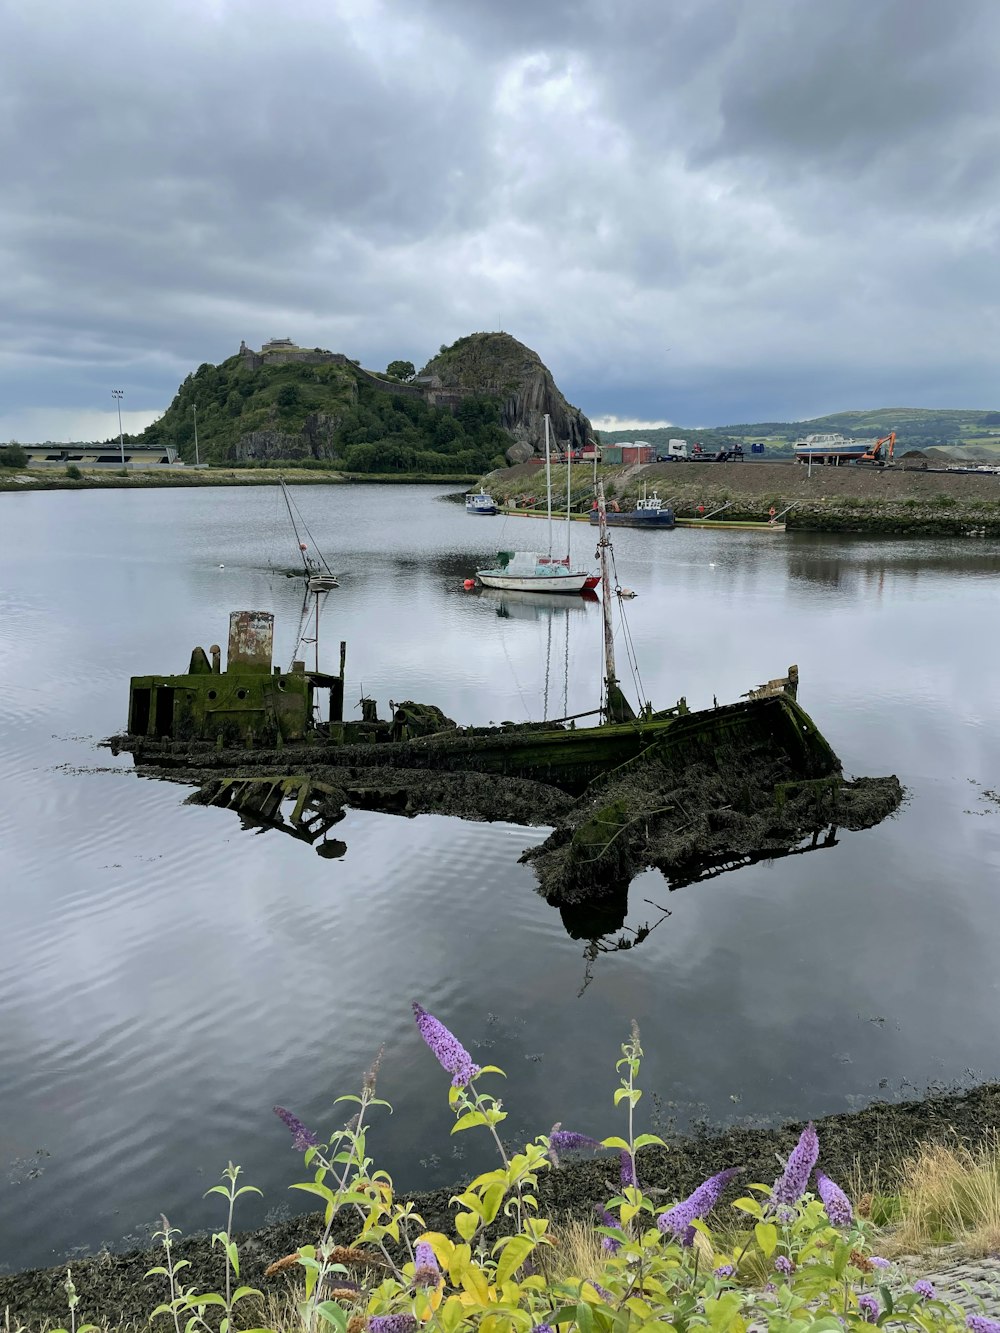 a body of water with boats and a hill in the background